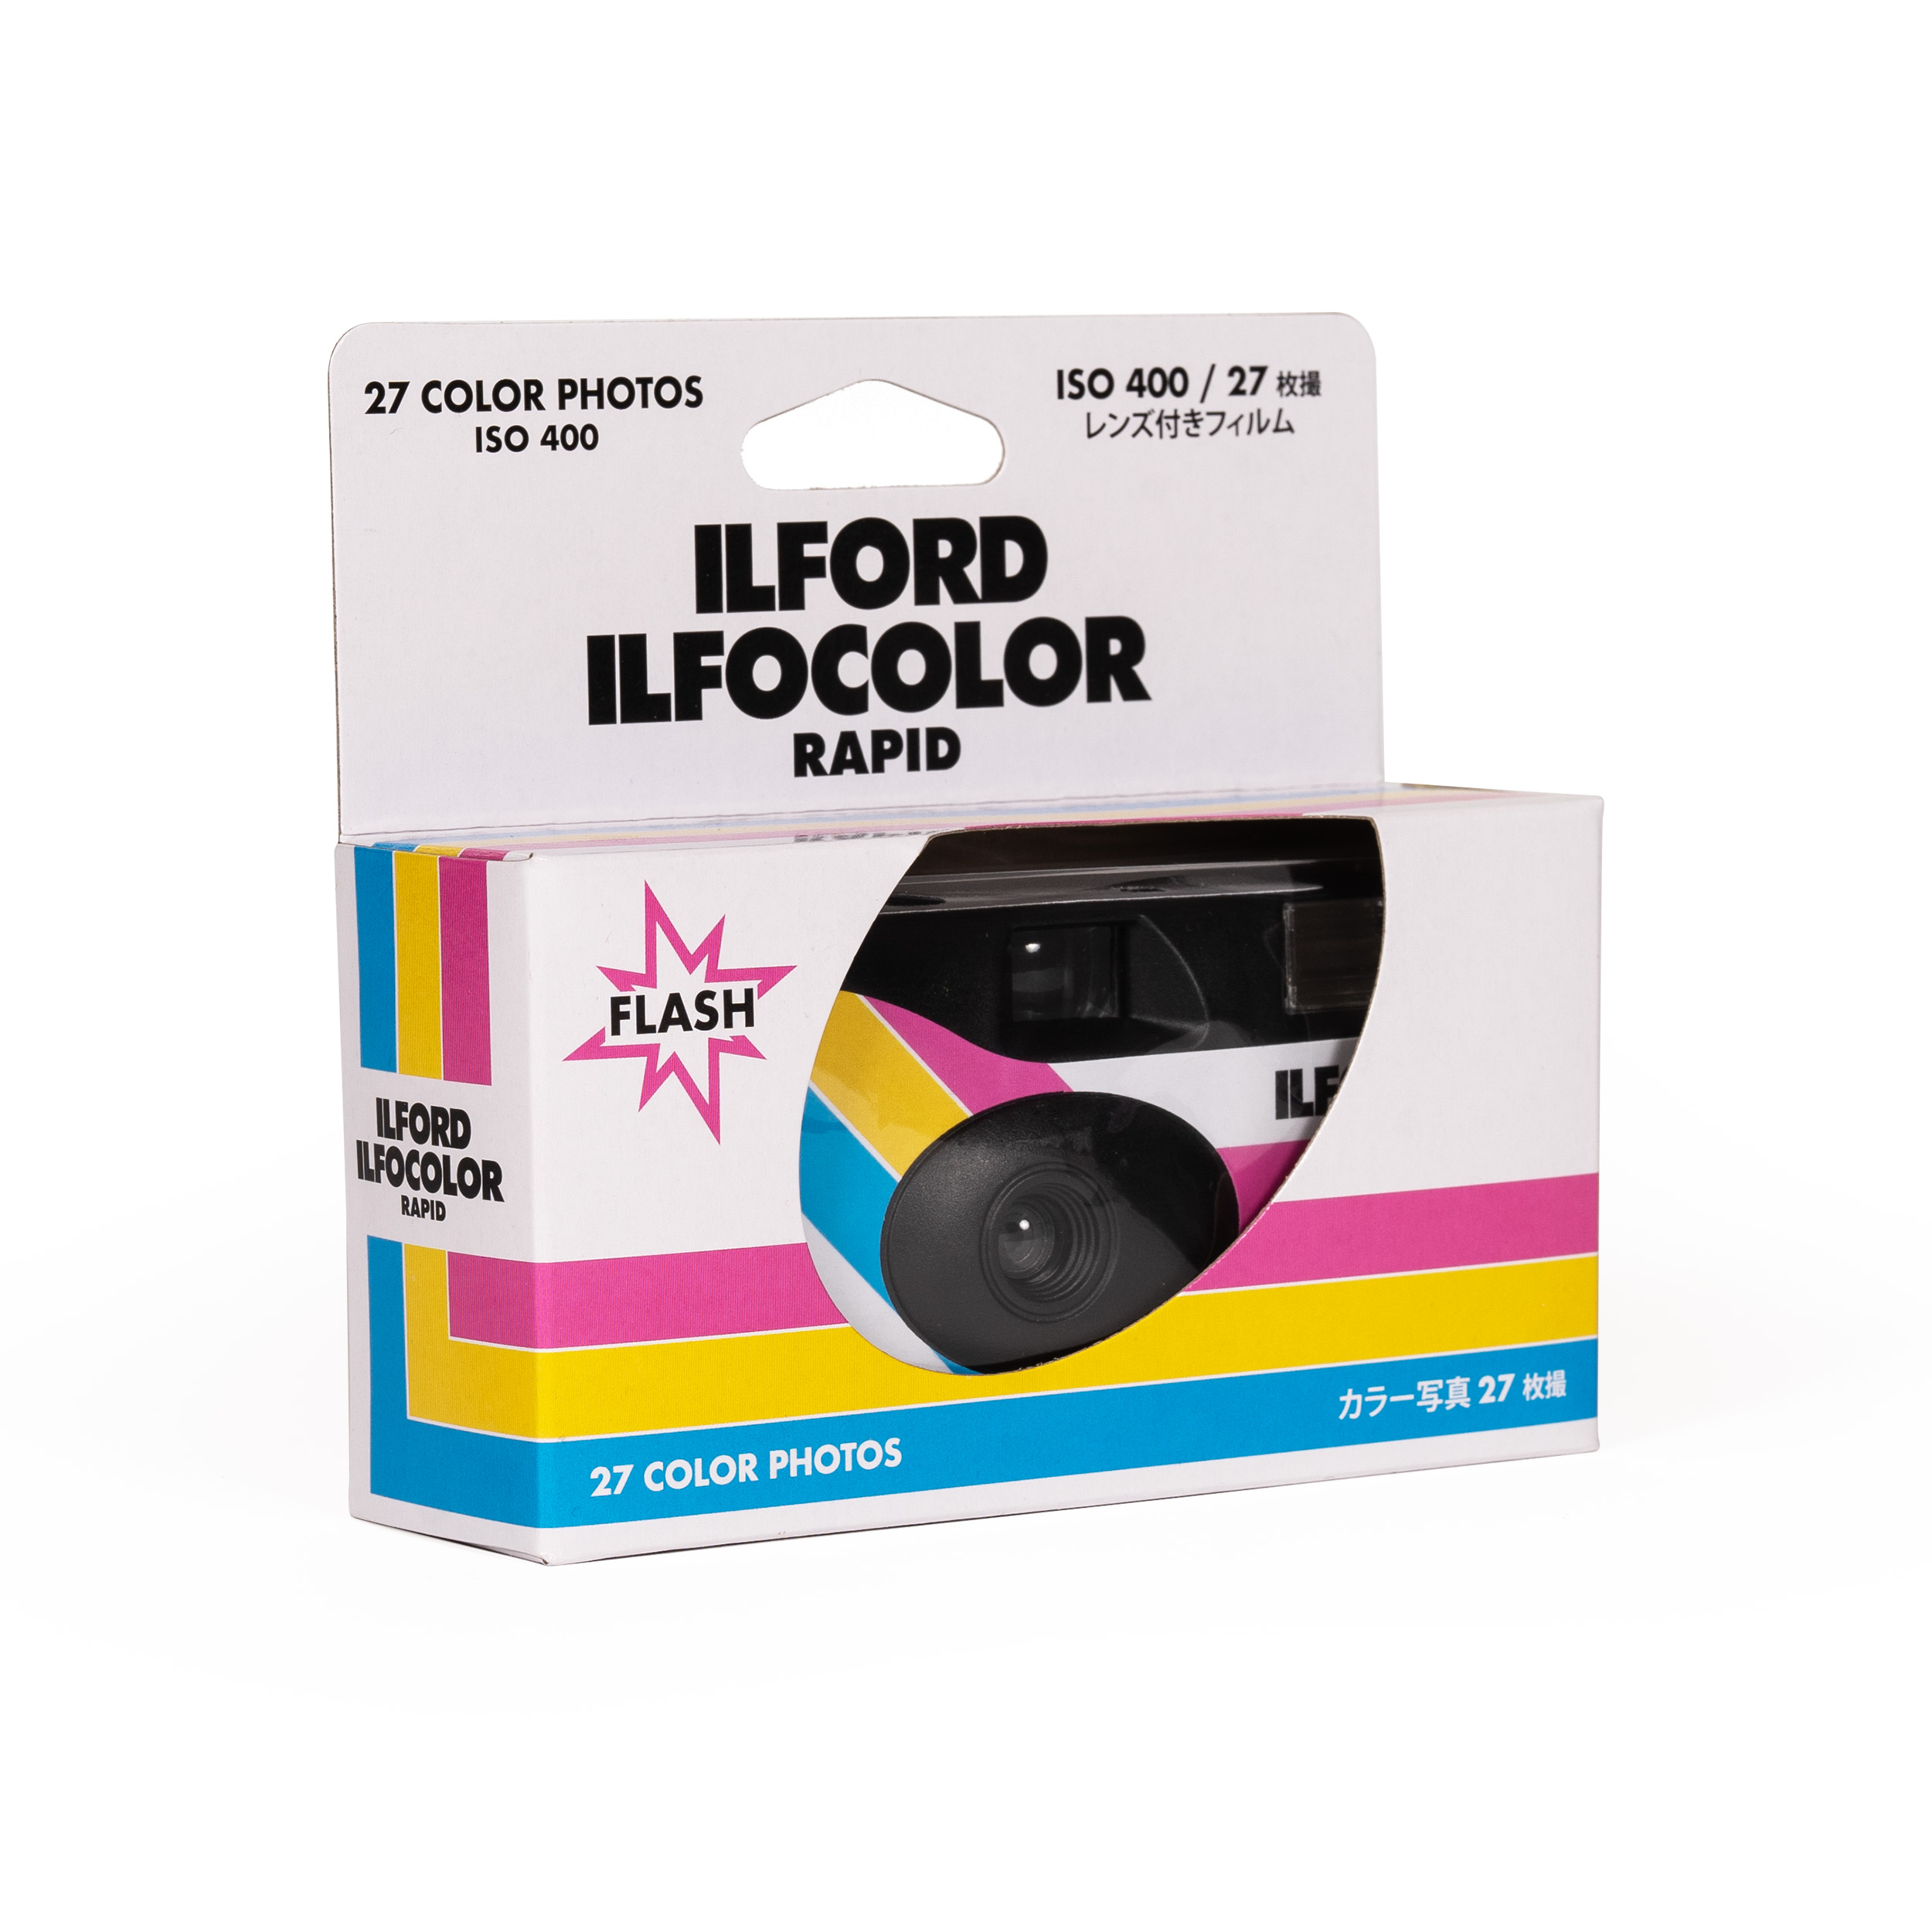 An investigation of the film in the new Ilfocolor Disposable cameras